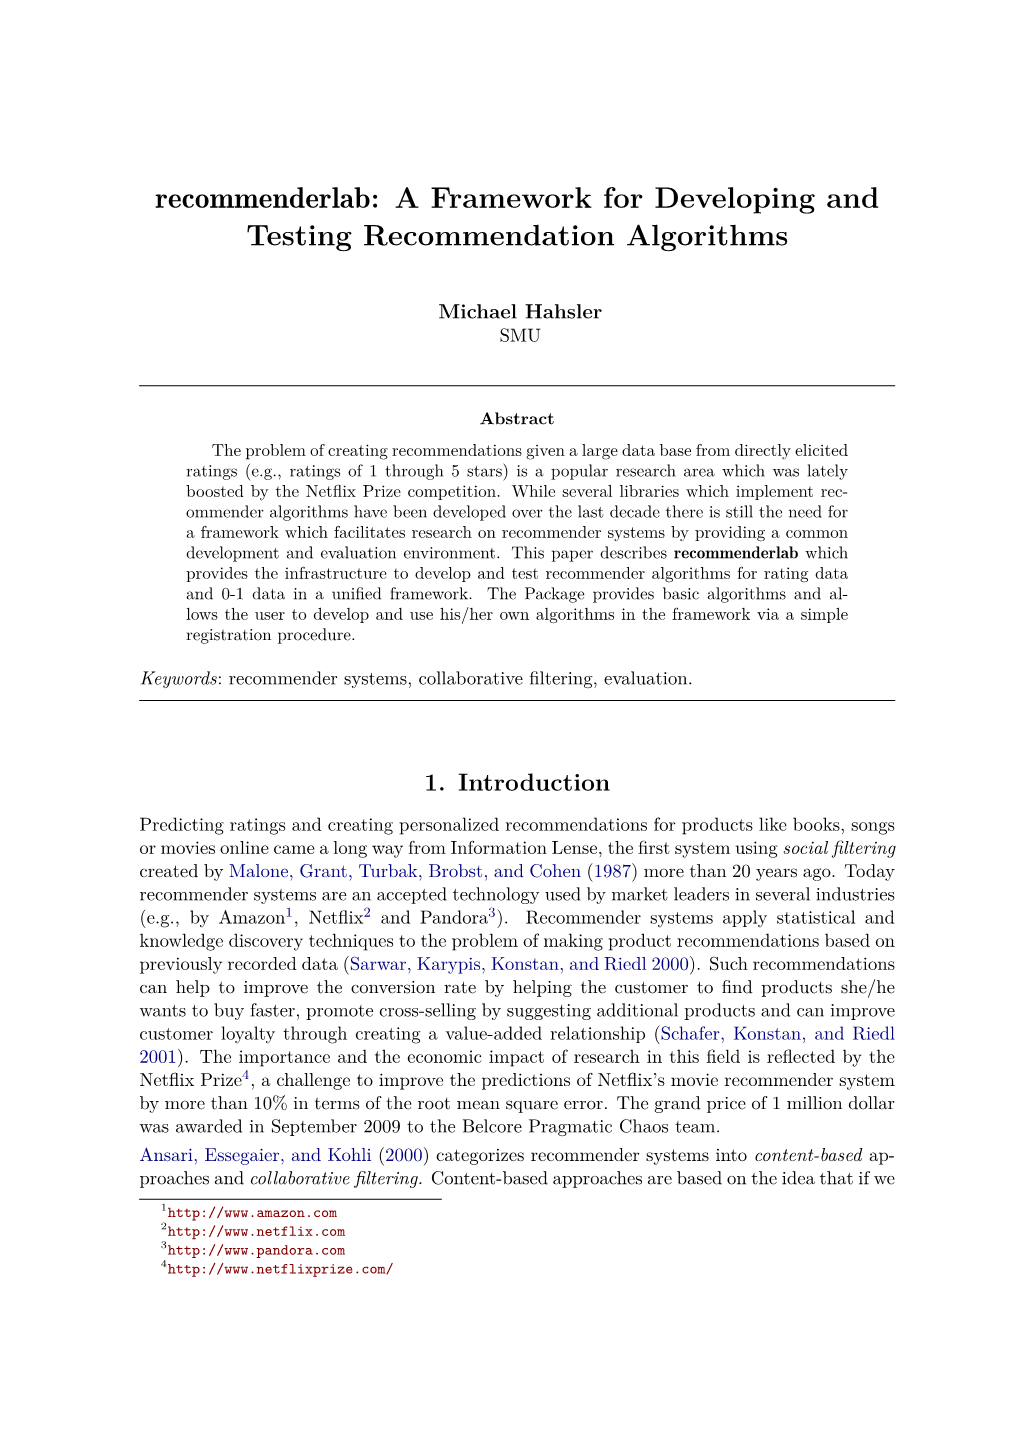 A Framework for Developing and Testing Recommendation Algorithms